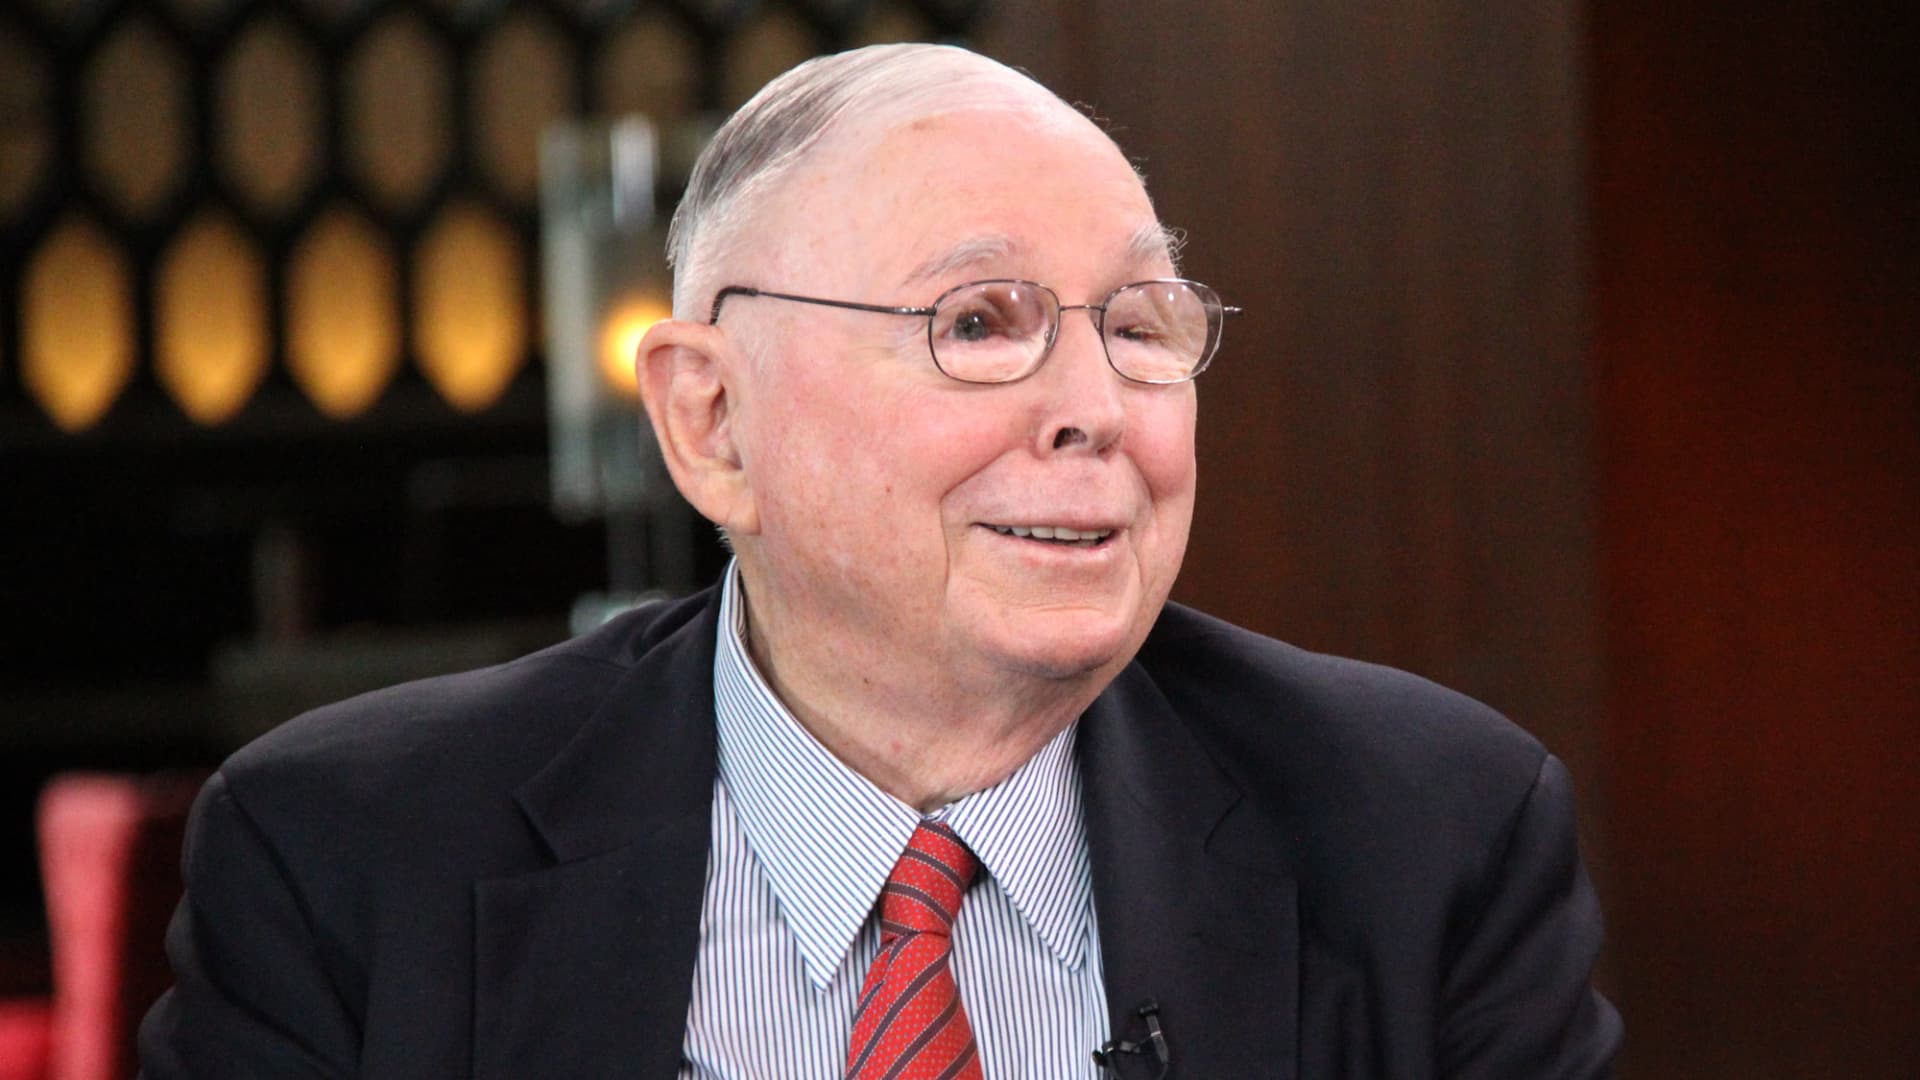 Charlie Munger lived in the same home for 70 years: Rich people who build 'really fancy houses' become 'less happy'